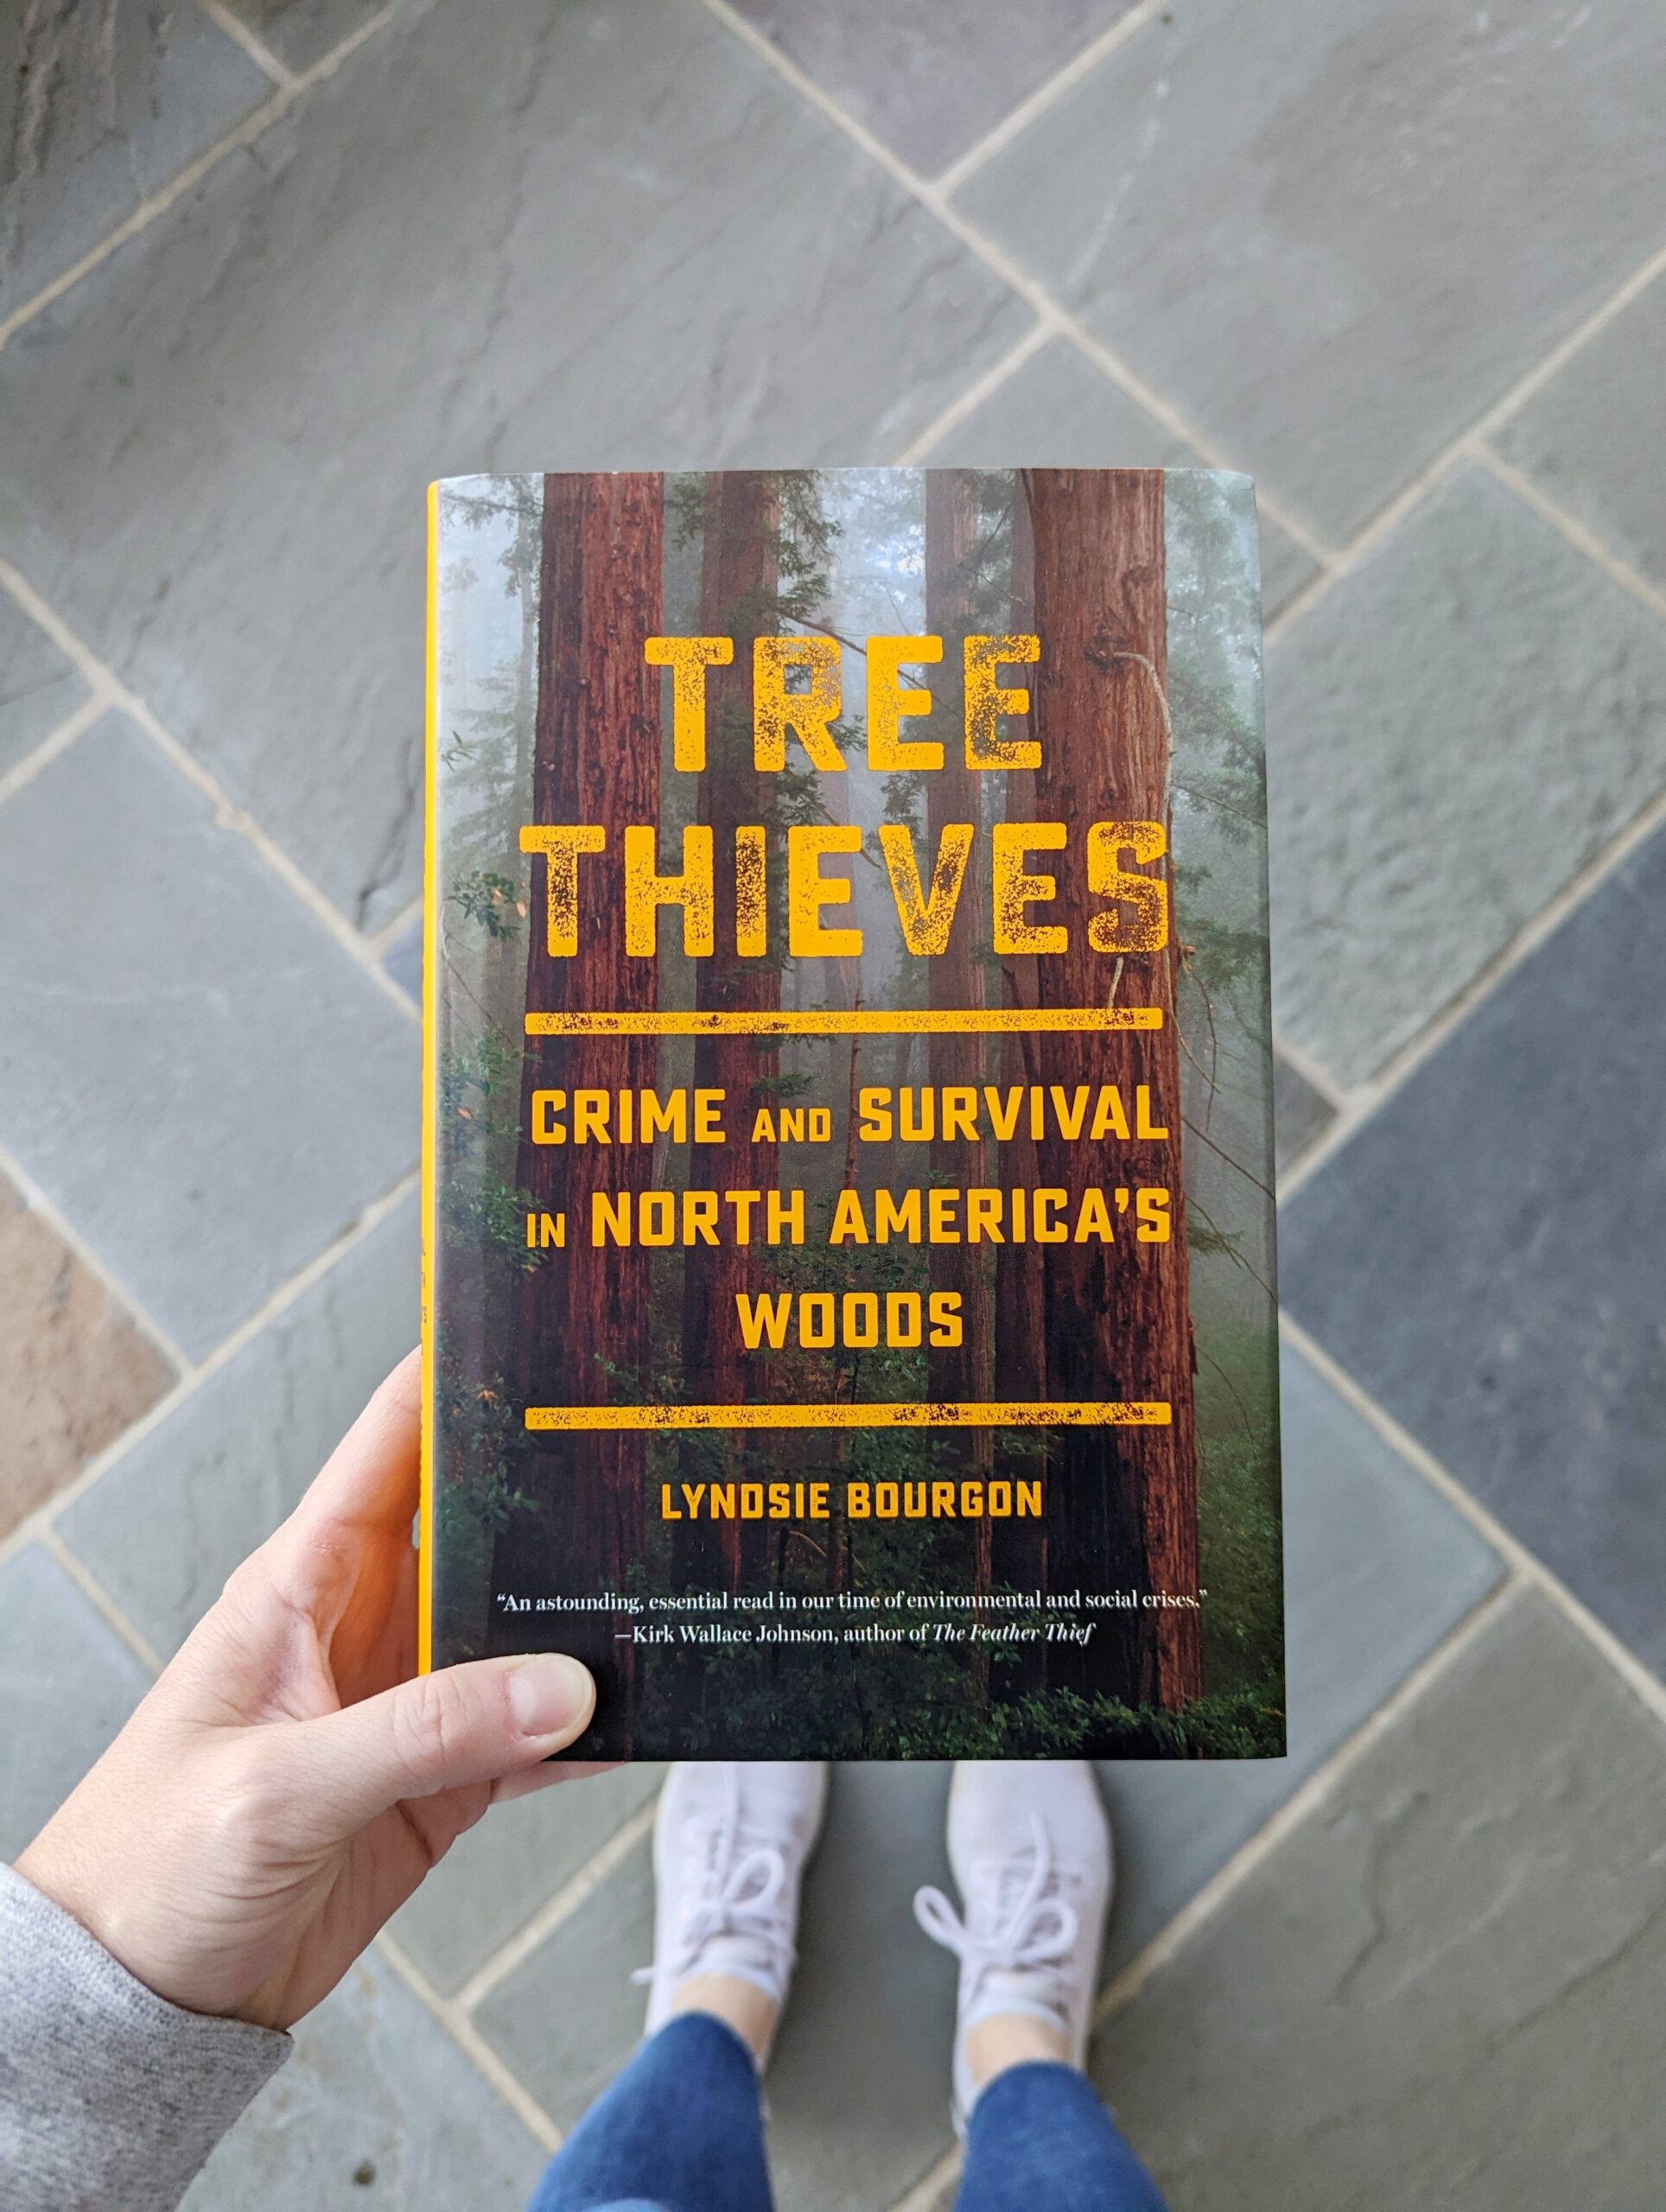 Book Review of Tree Thieves: Crime and Survival in North America’s Woods